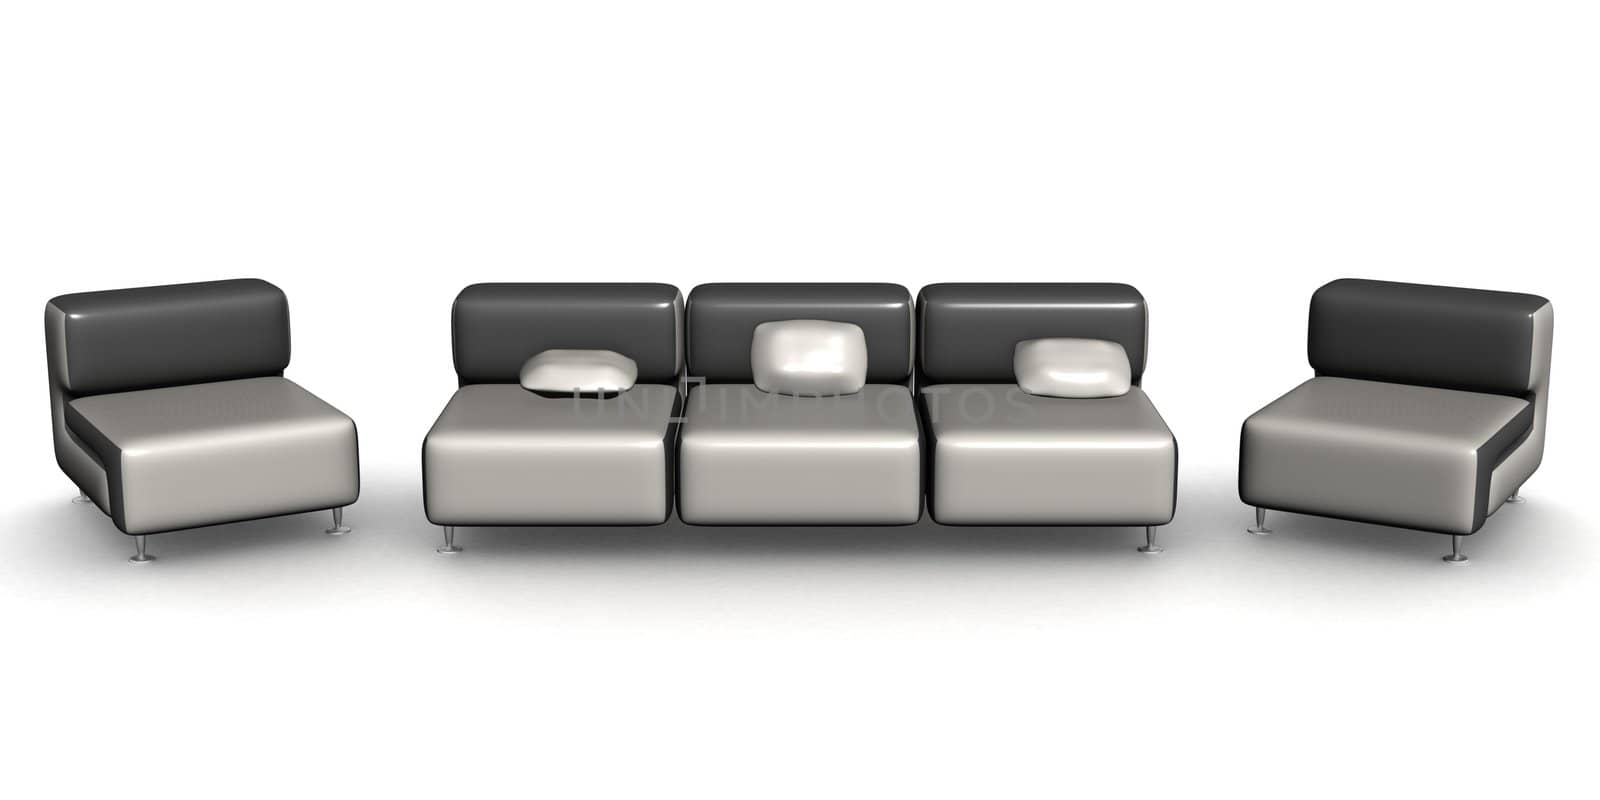 sofa and two armchairs. An interior. 3D image.